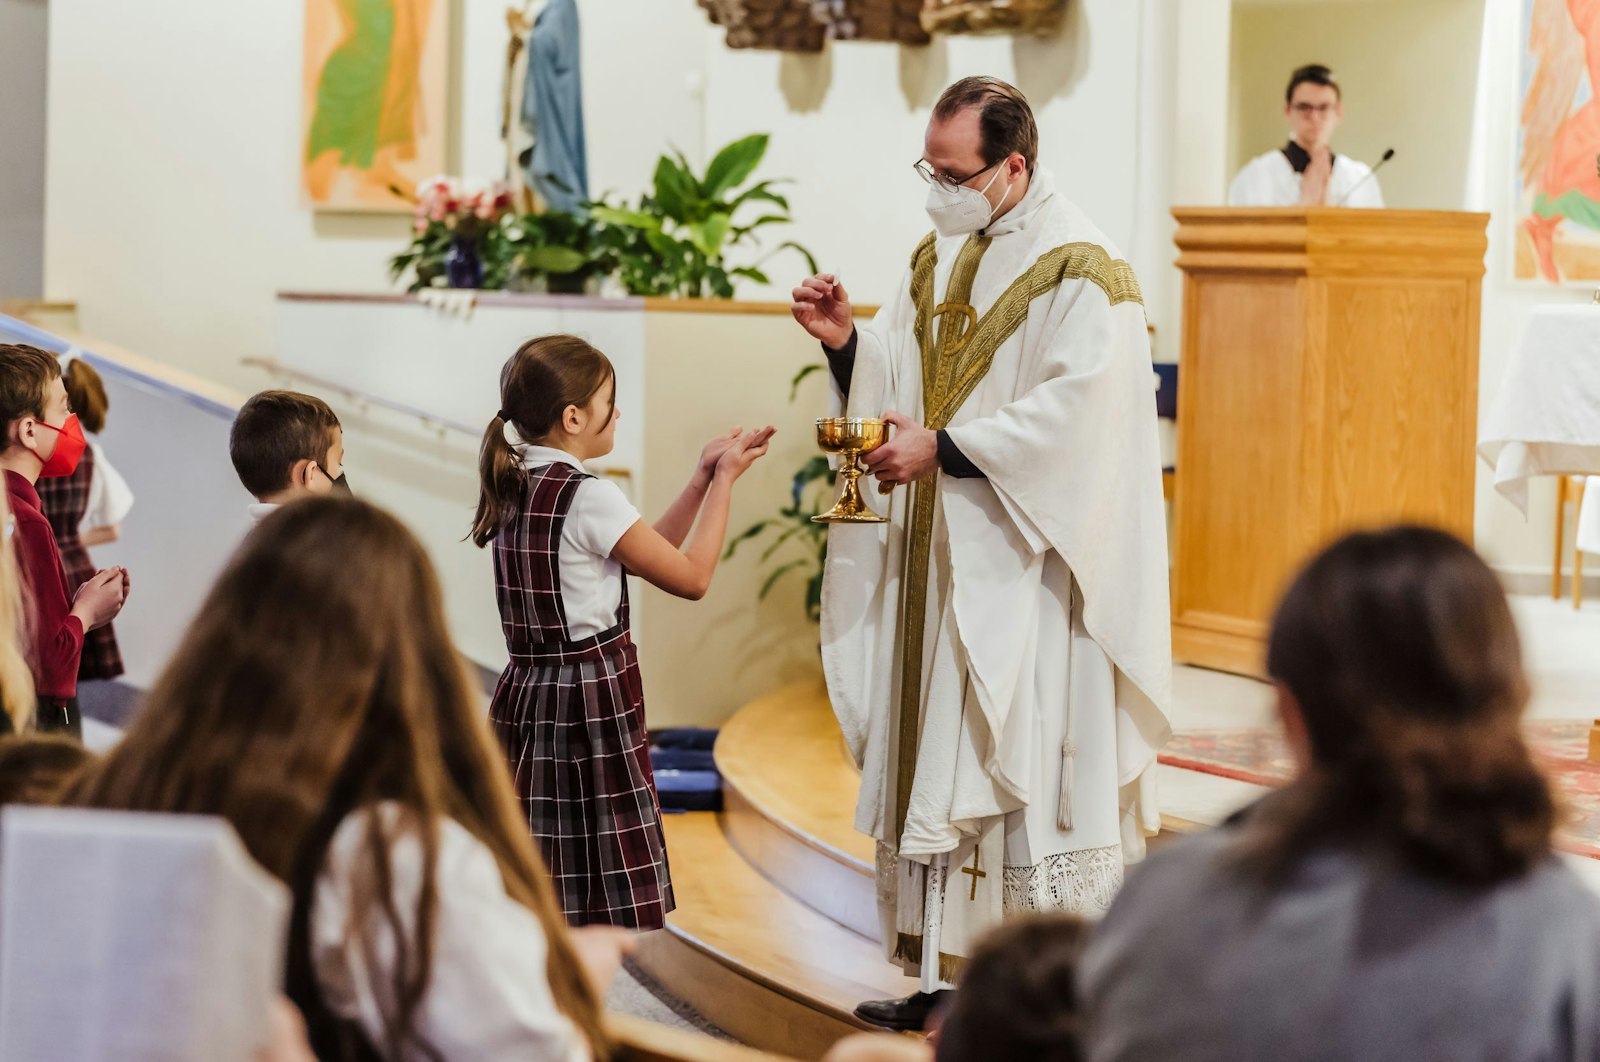 Fr. David Cybulski, pastor of St. Isaac Jogues Parish in St. Clair Shores, distributes Communion during an all-school Mass. At least 12 families with a connection to St. Isaac Jogues School, which has a student population of 220, will be entering the Catholic Church this Easter.